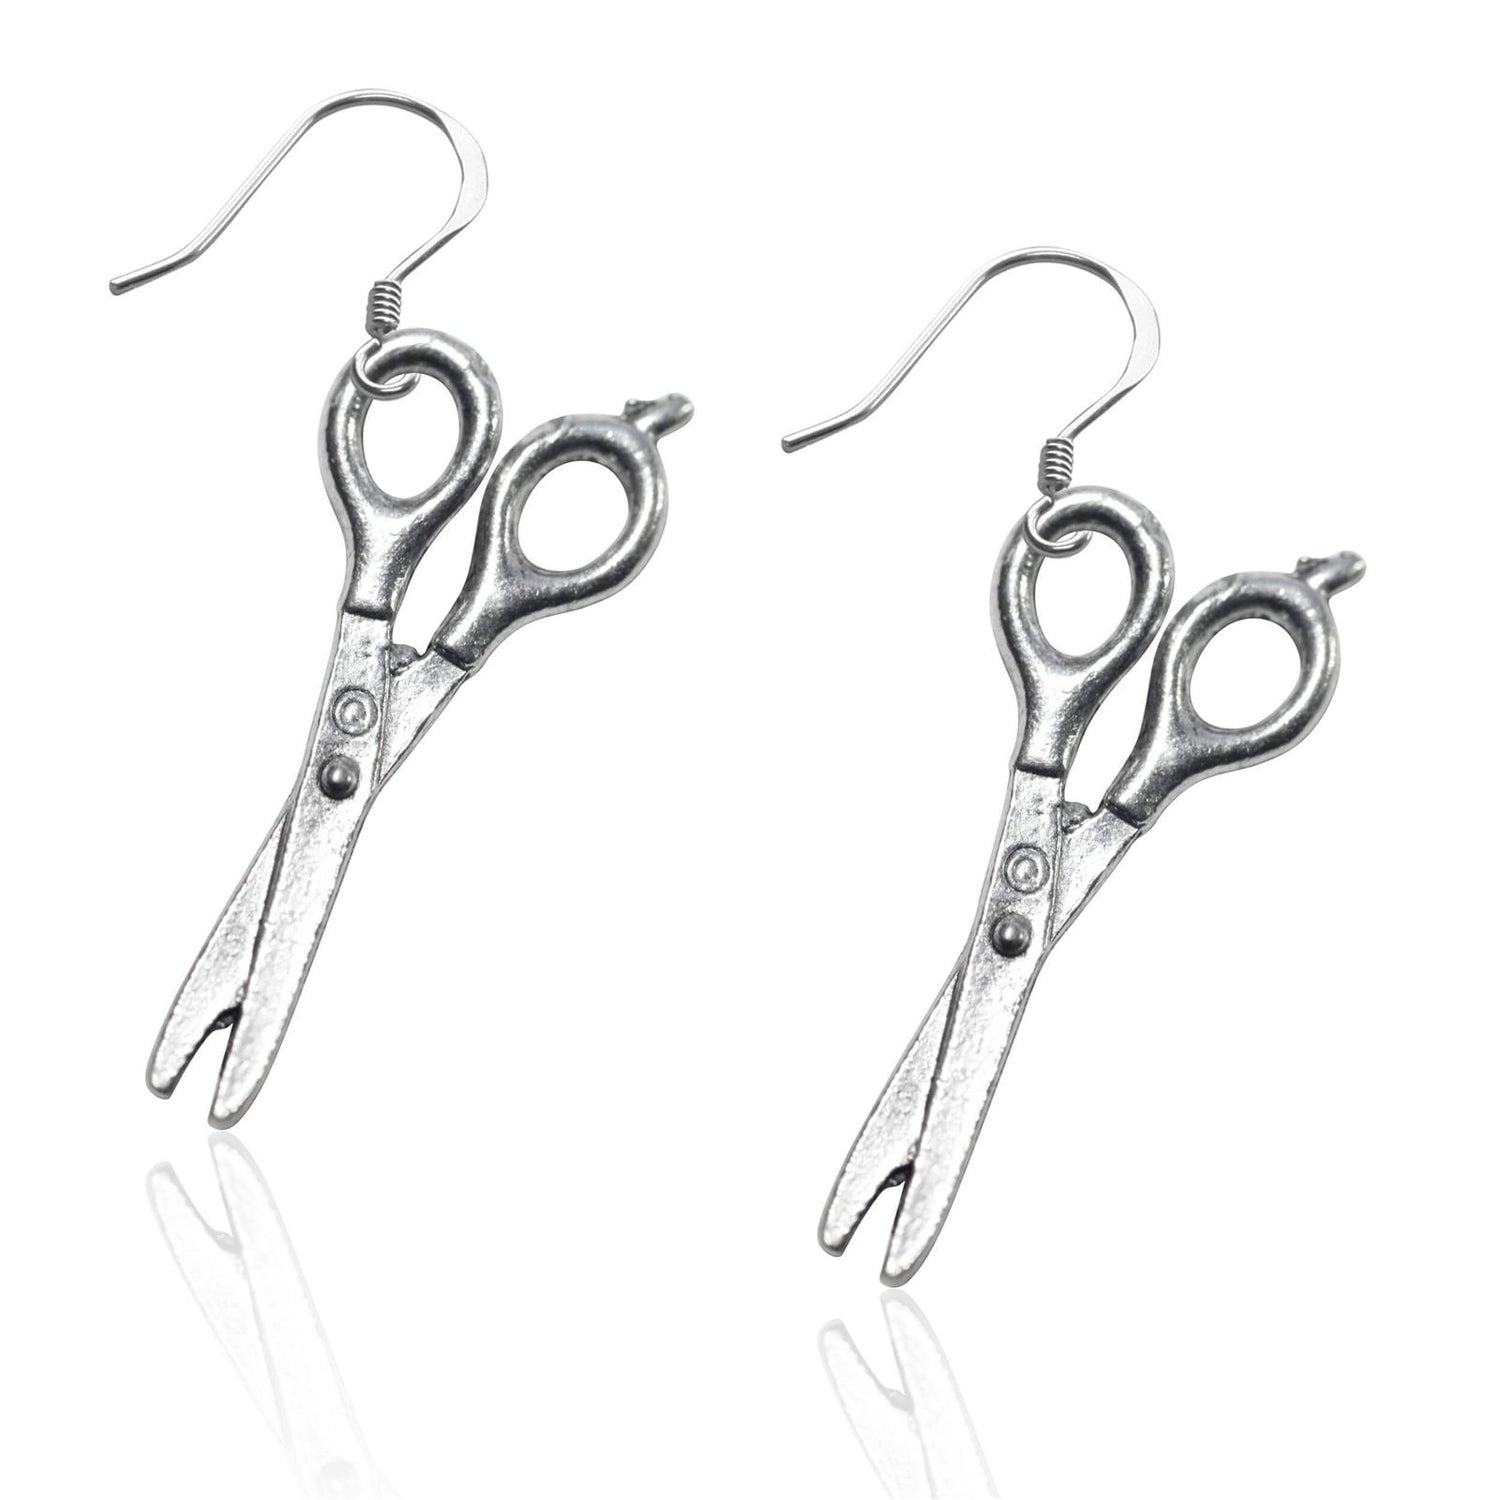 Whimsical Gifts | Scissors Earrings in Silver Finish | Professions Themed | Salon & Spa Professions | Jewelry